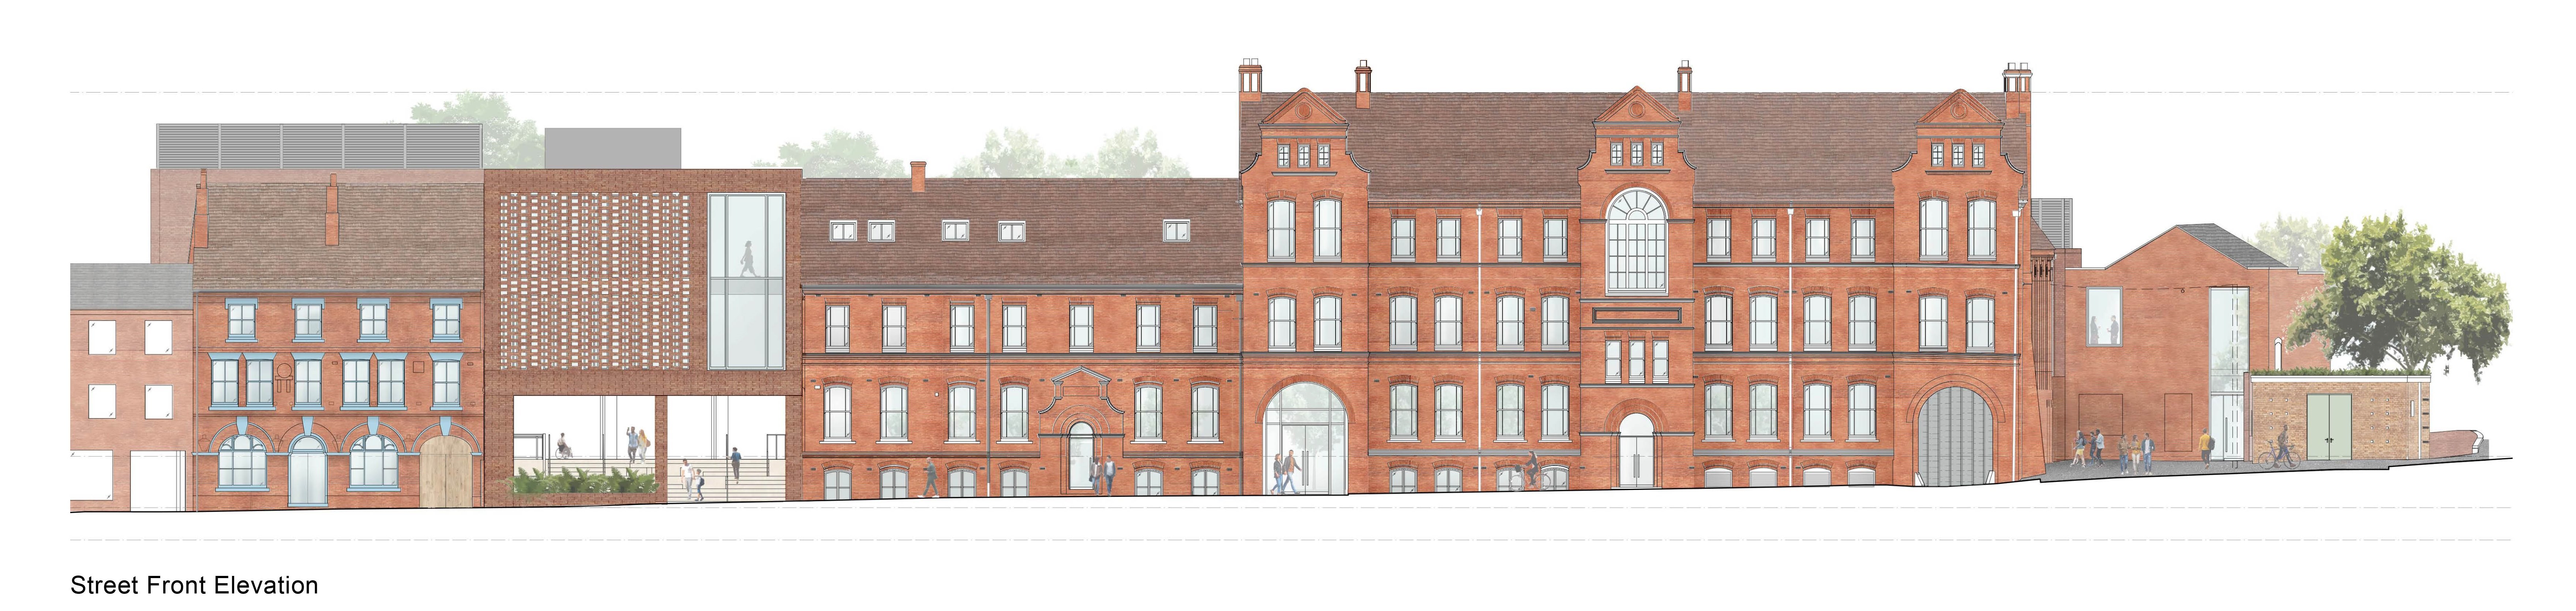 Image shows artists impression of the front elevation of building 